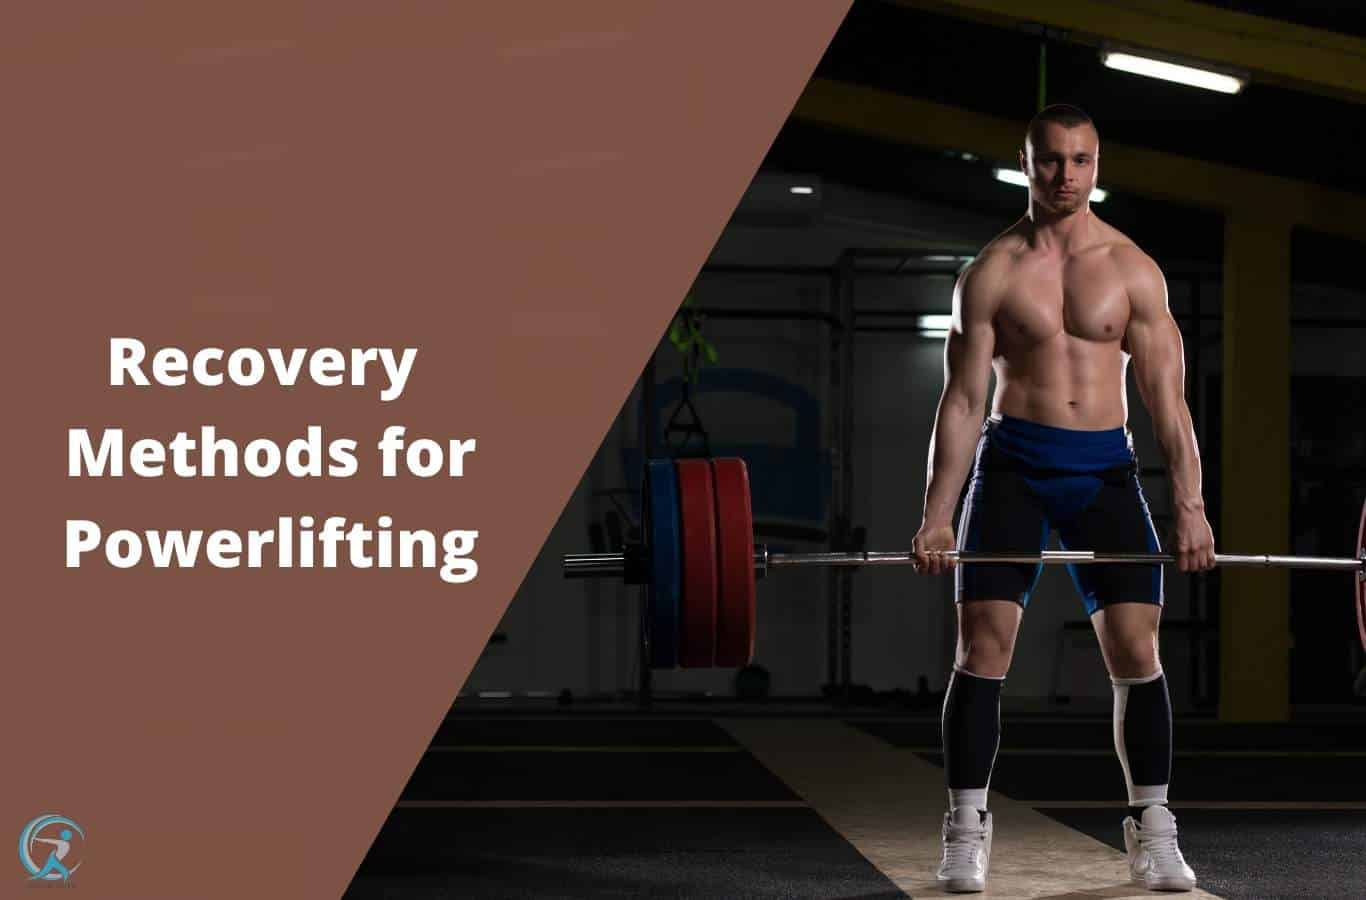 The Best Recovery Methods for Powerlifting